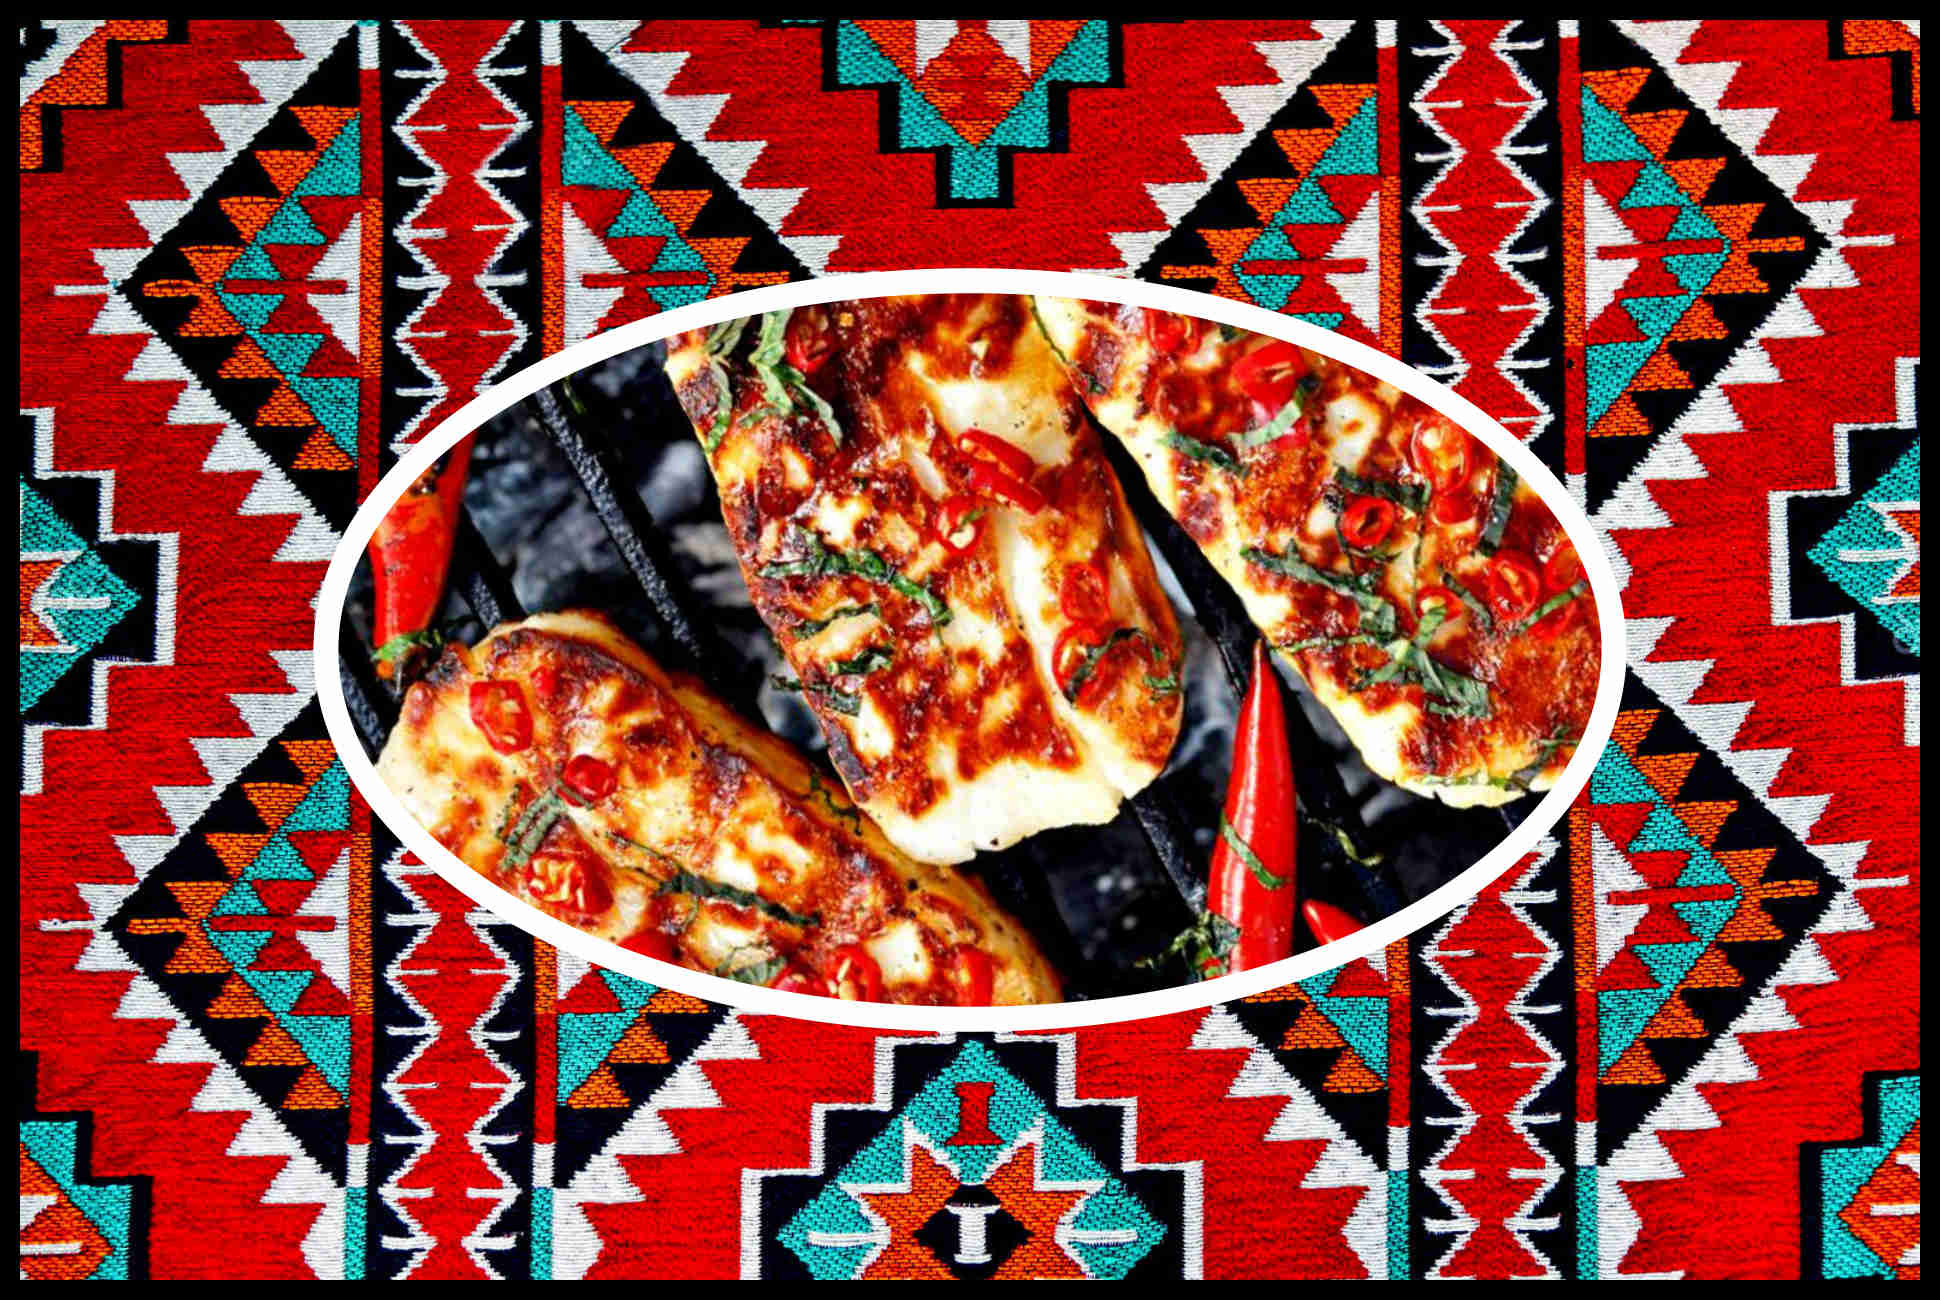 Hot Appetizer; Grilled Halloumi Cheese; My Mom's Recipe; Petra Dining; Culinary Delight; Local Cuisine; Gourmet Halloumi Dish; Jordanian Appetizer; Fine Dining Petra; Savory Halloumi Delight; Top Petra Restaurant; Exquisite Grilled Cheese; Petra Gastronomy; Best Halloumi in Petra; Unique Culinary Experience; Petra's Halloumi Specials; Premium Cheese Appetizer; Jordanian Culinary Gem; Halloumi Gastronomic Delight.